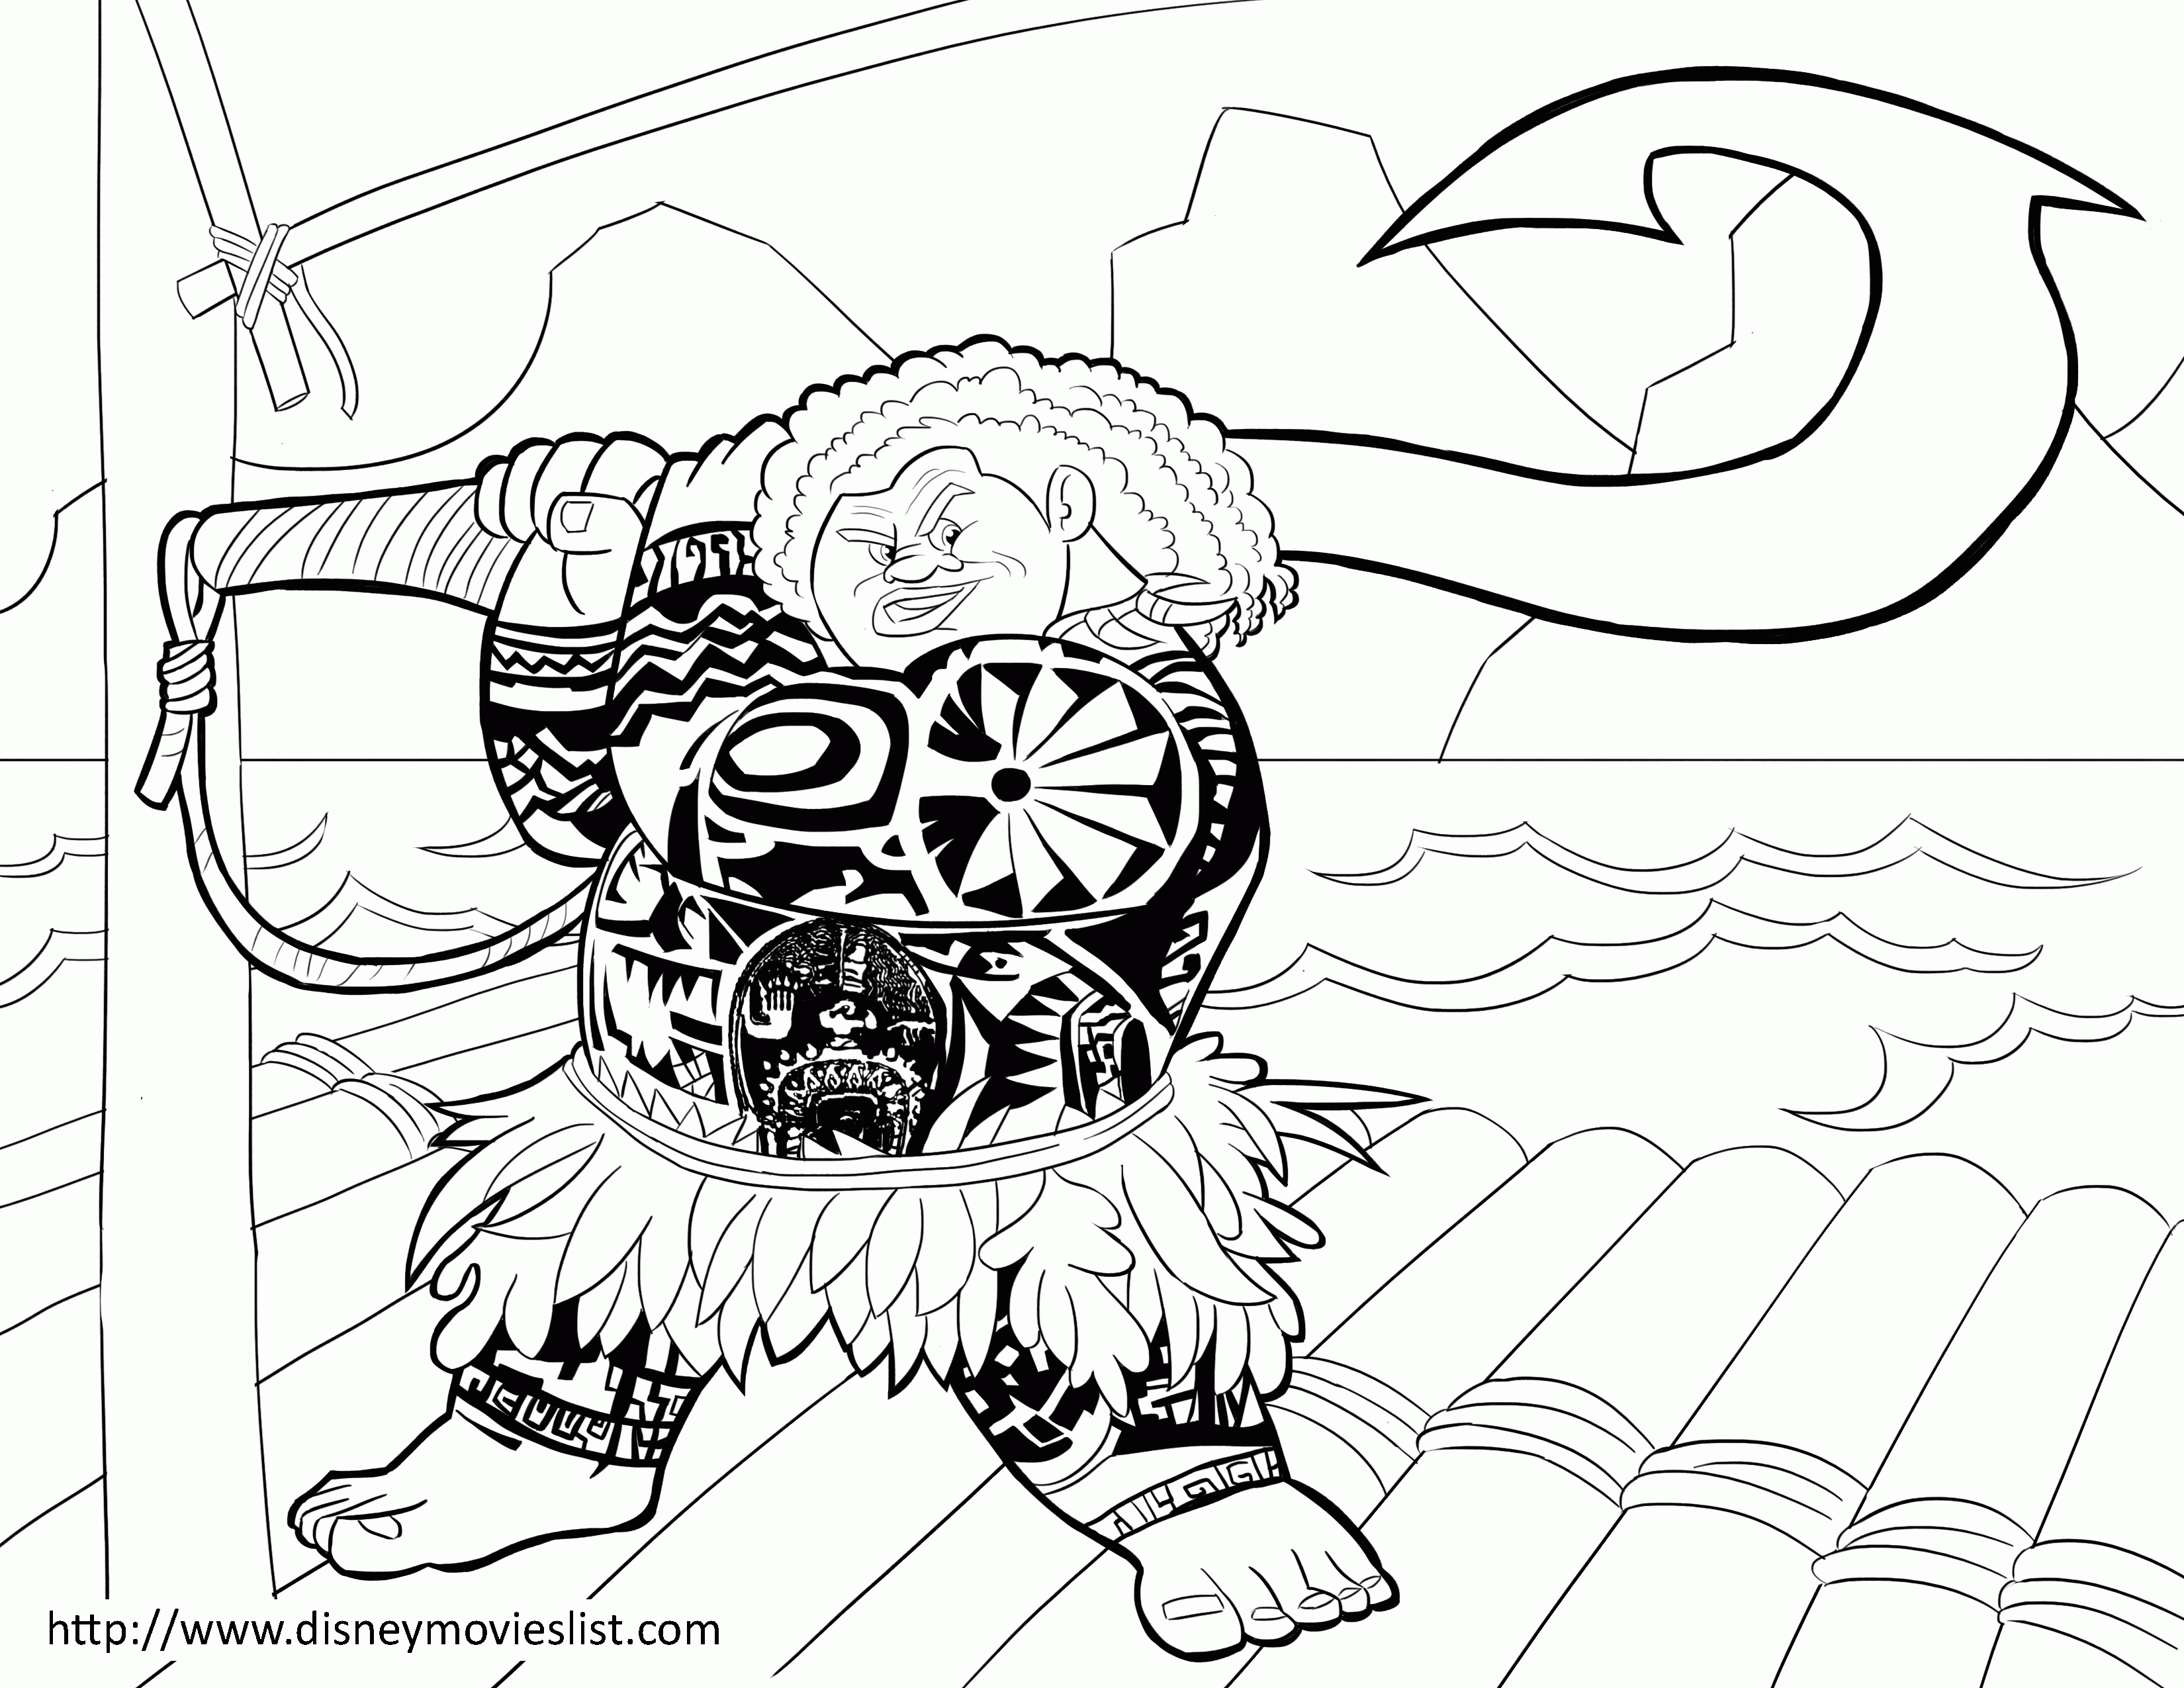 Maui Coloring Page - Moana Coloring Pages